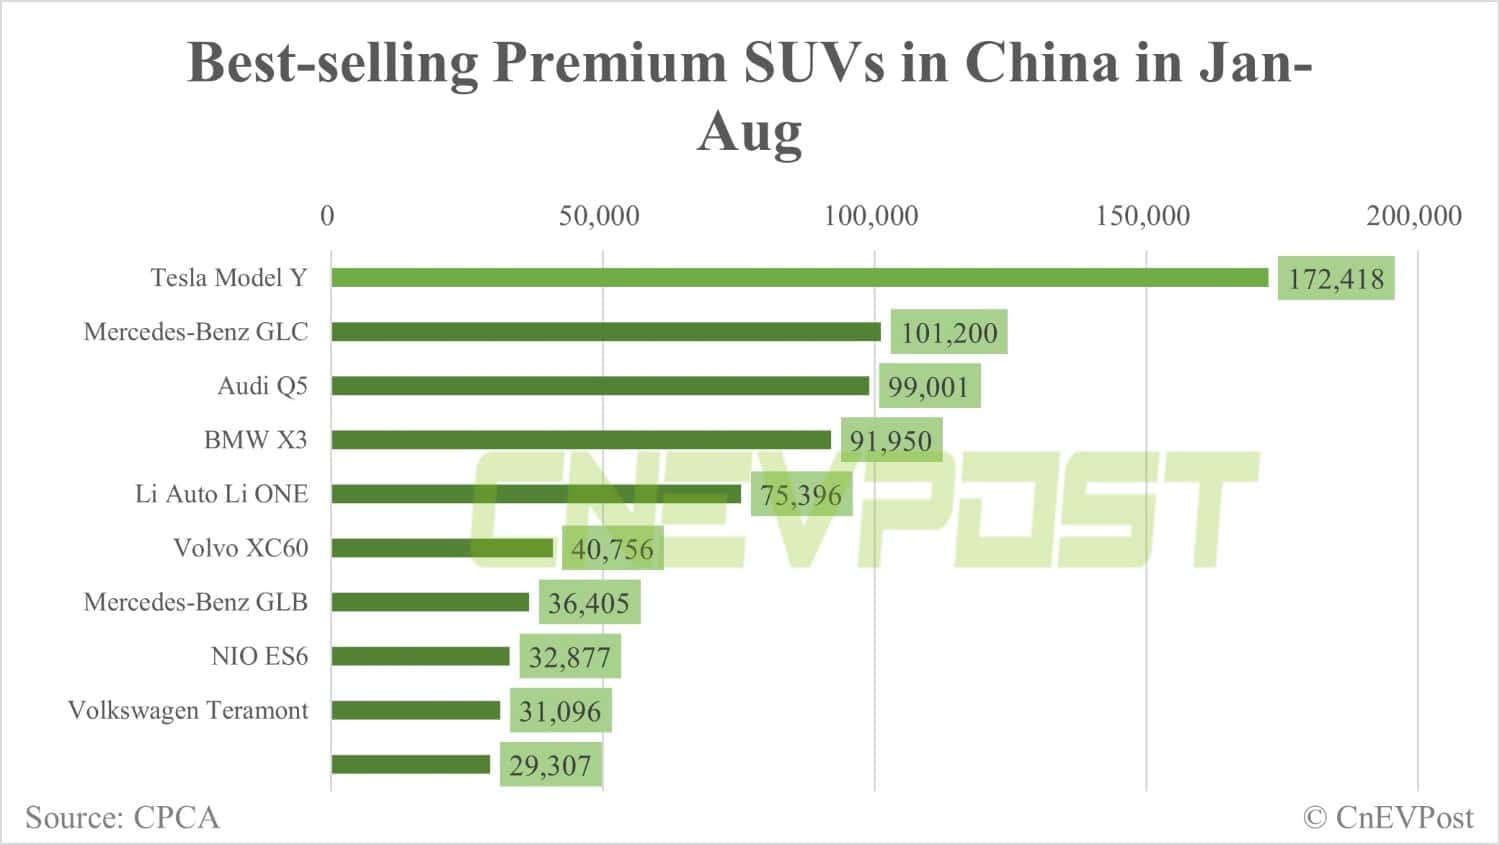 Tesla Model Y best-selling premium SUV in China in Aug at 31,112 units-CnEVPost